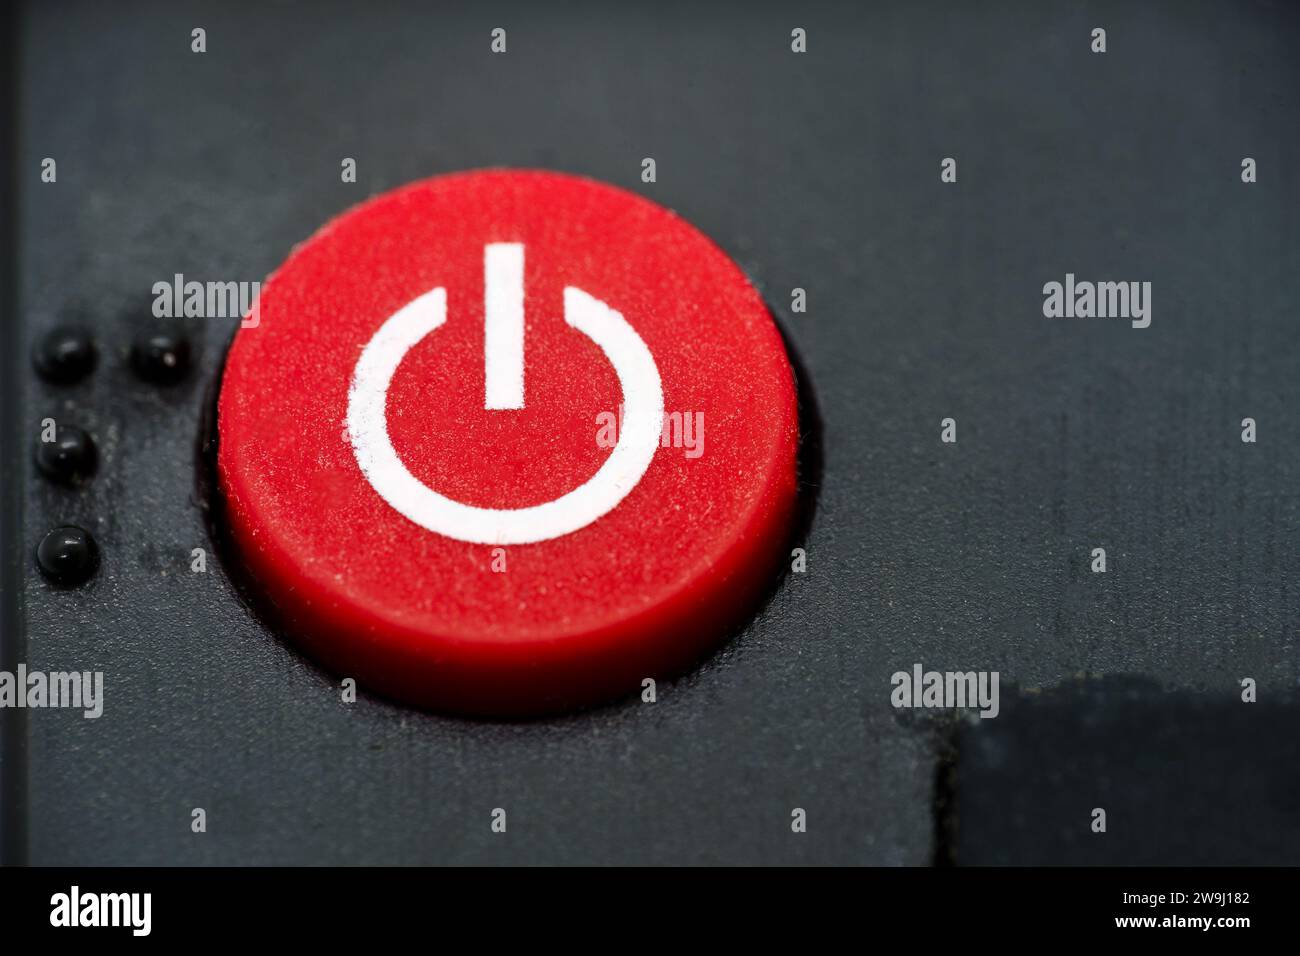 Red power button of a TV remote, close up macro. Stock Photo